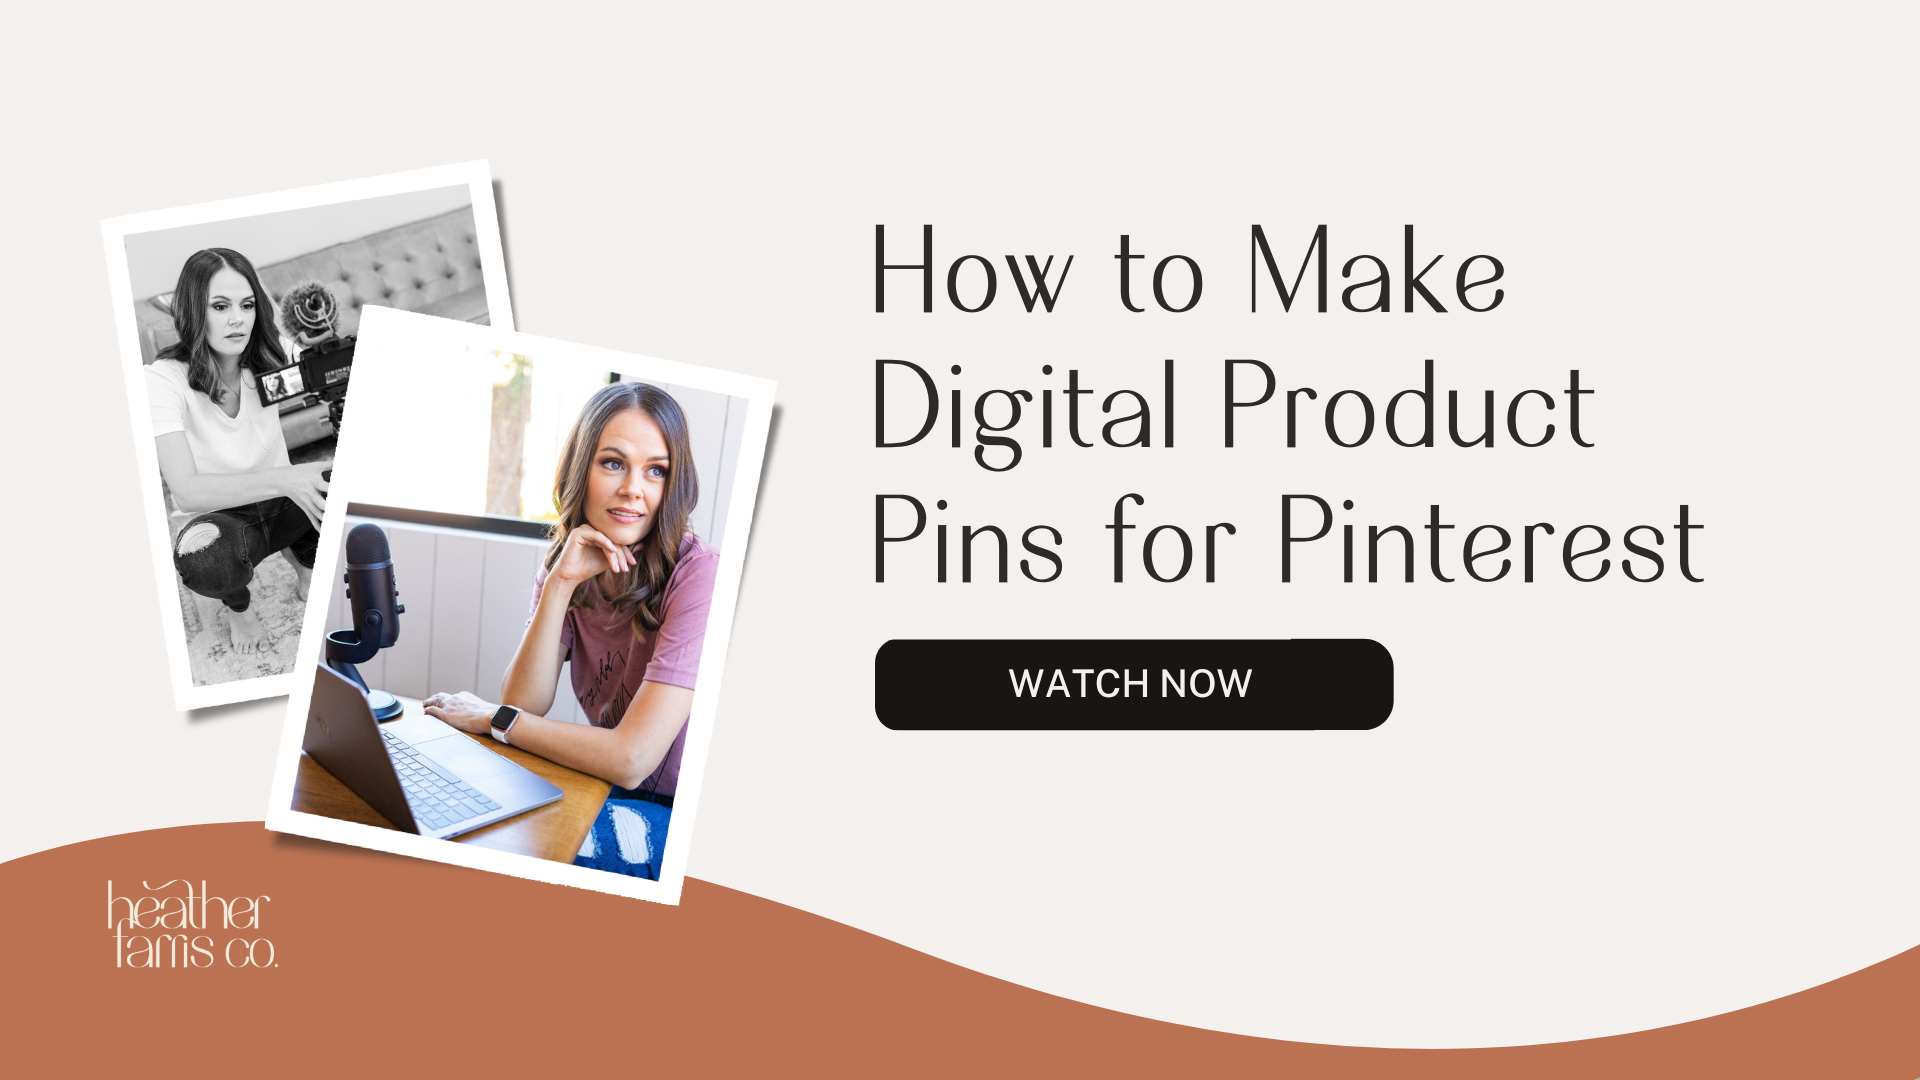 How to Make Digital Product Pins for Pinterest